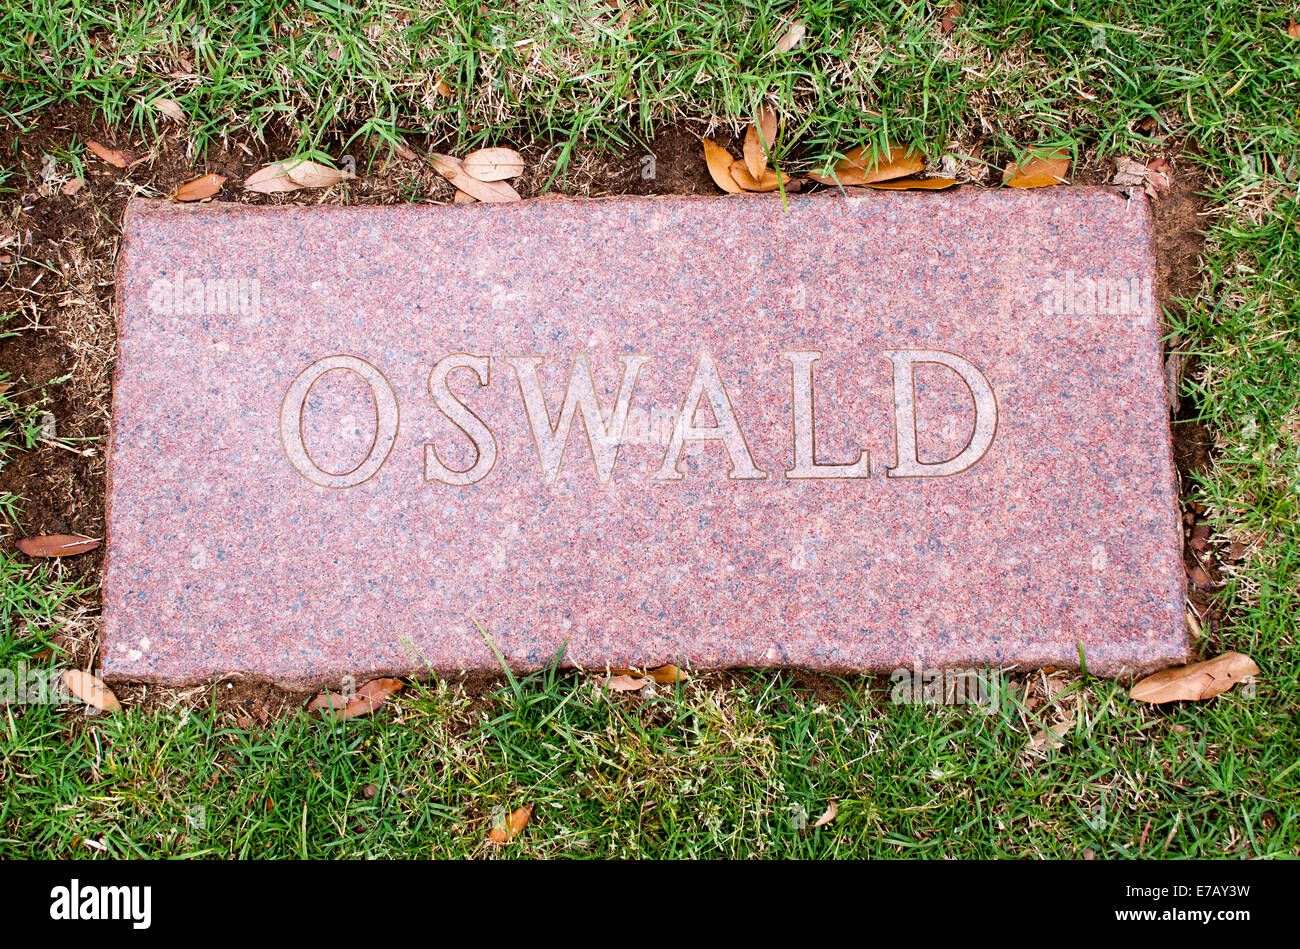 Harvey Oswald grave in Fort Worth Texas Foto Stock